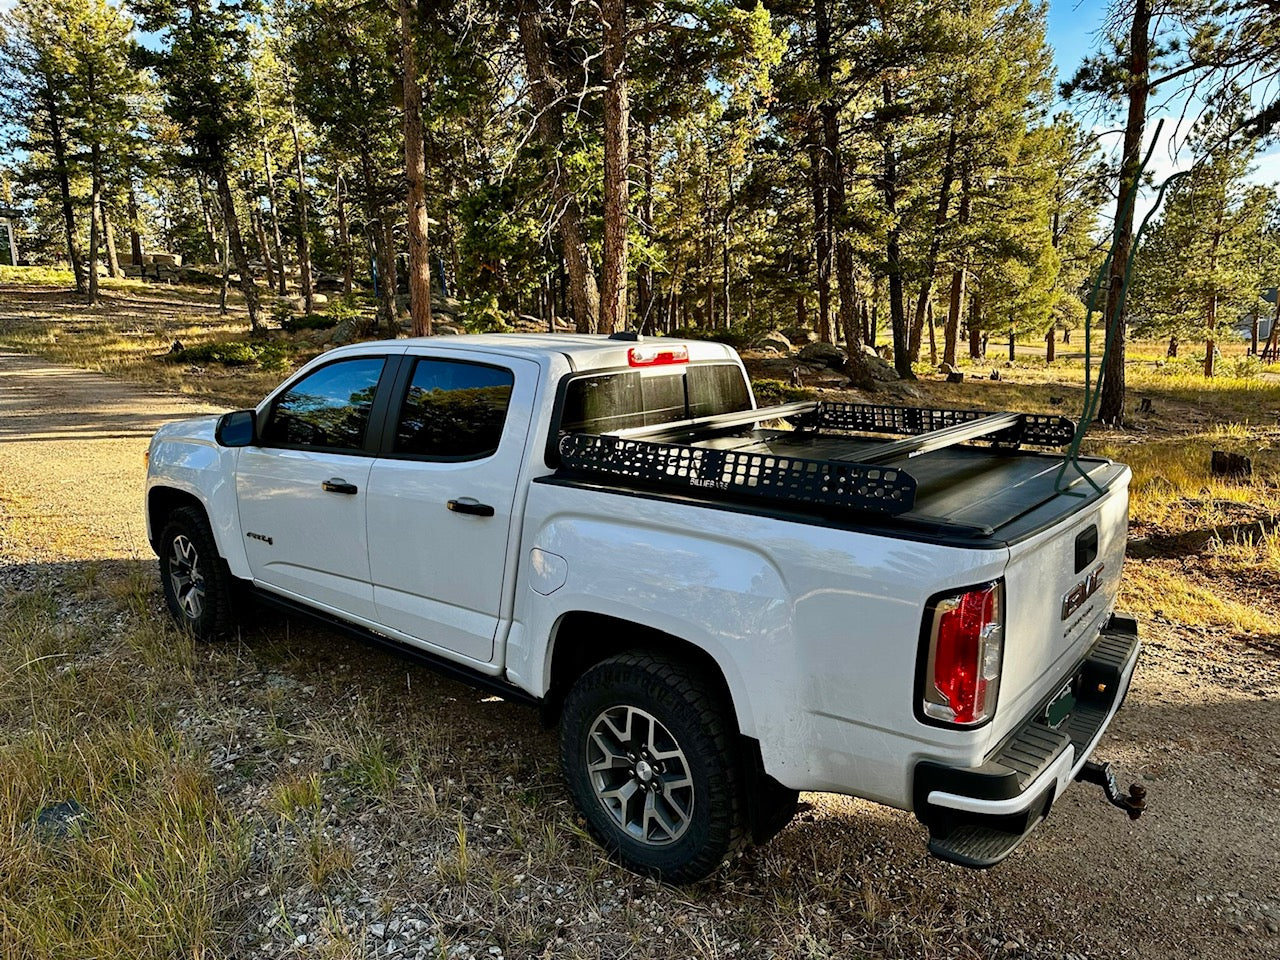 Colorado/Canyon - Bed Rack For Retractable Covers with T-slots